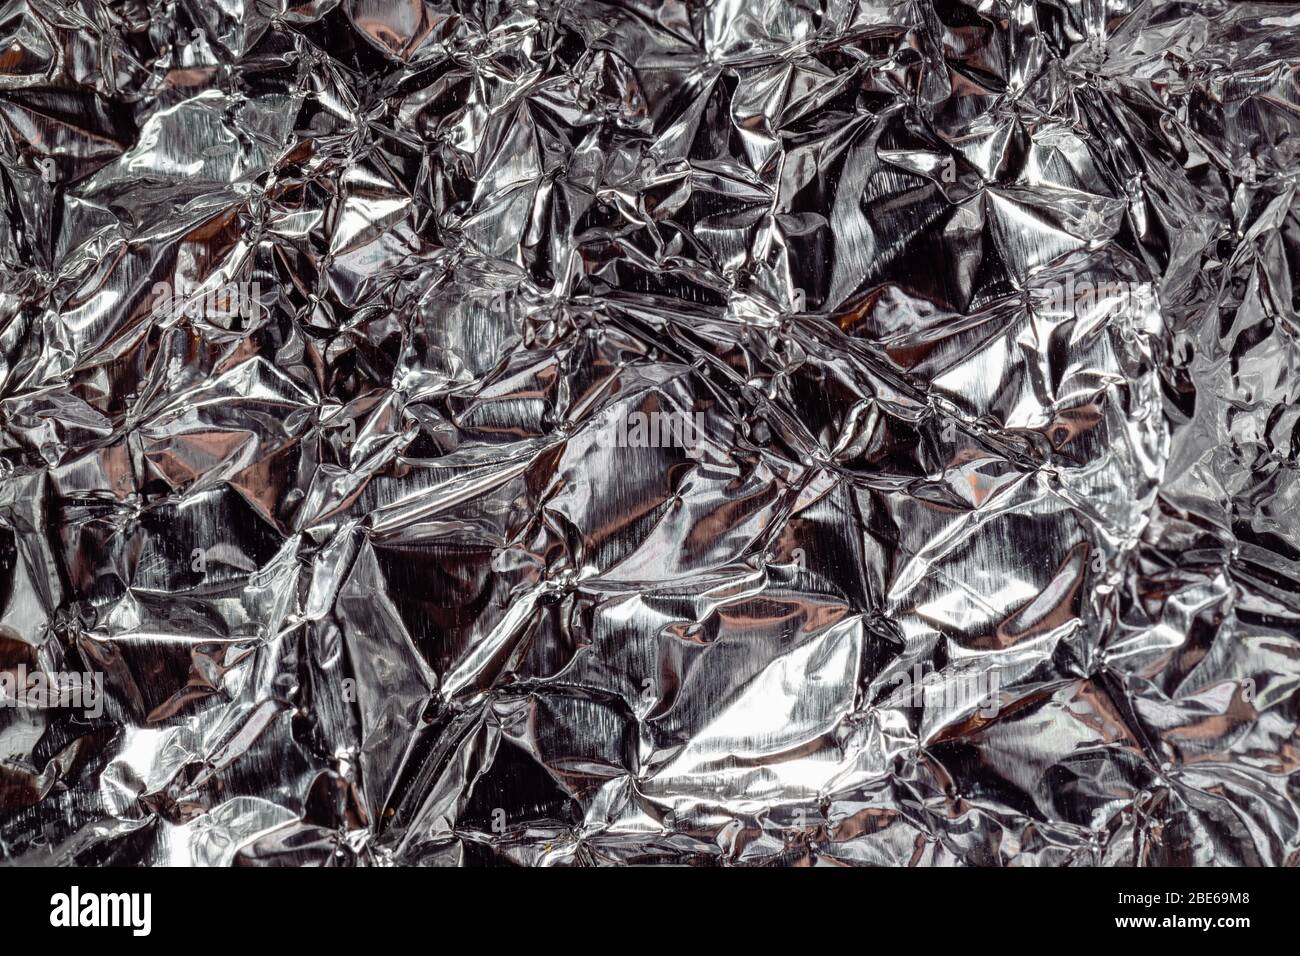 Silver Foil Decorative Texture Background Stock Photo - Download Image Now  - Silver - Metal, Silver Colored, Textured Effect - iStock